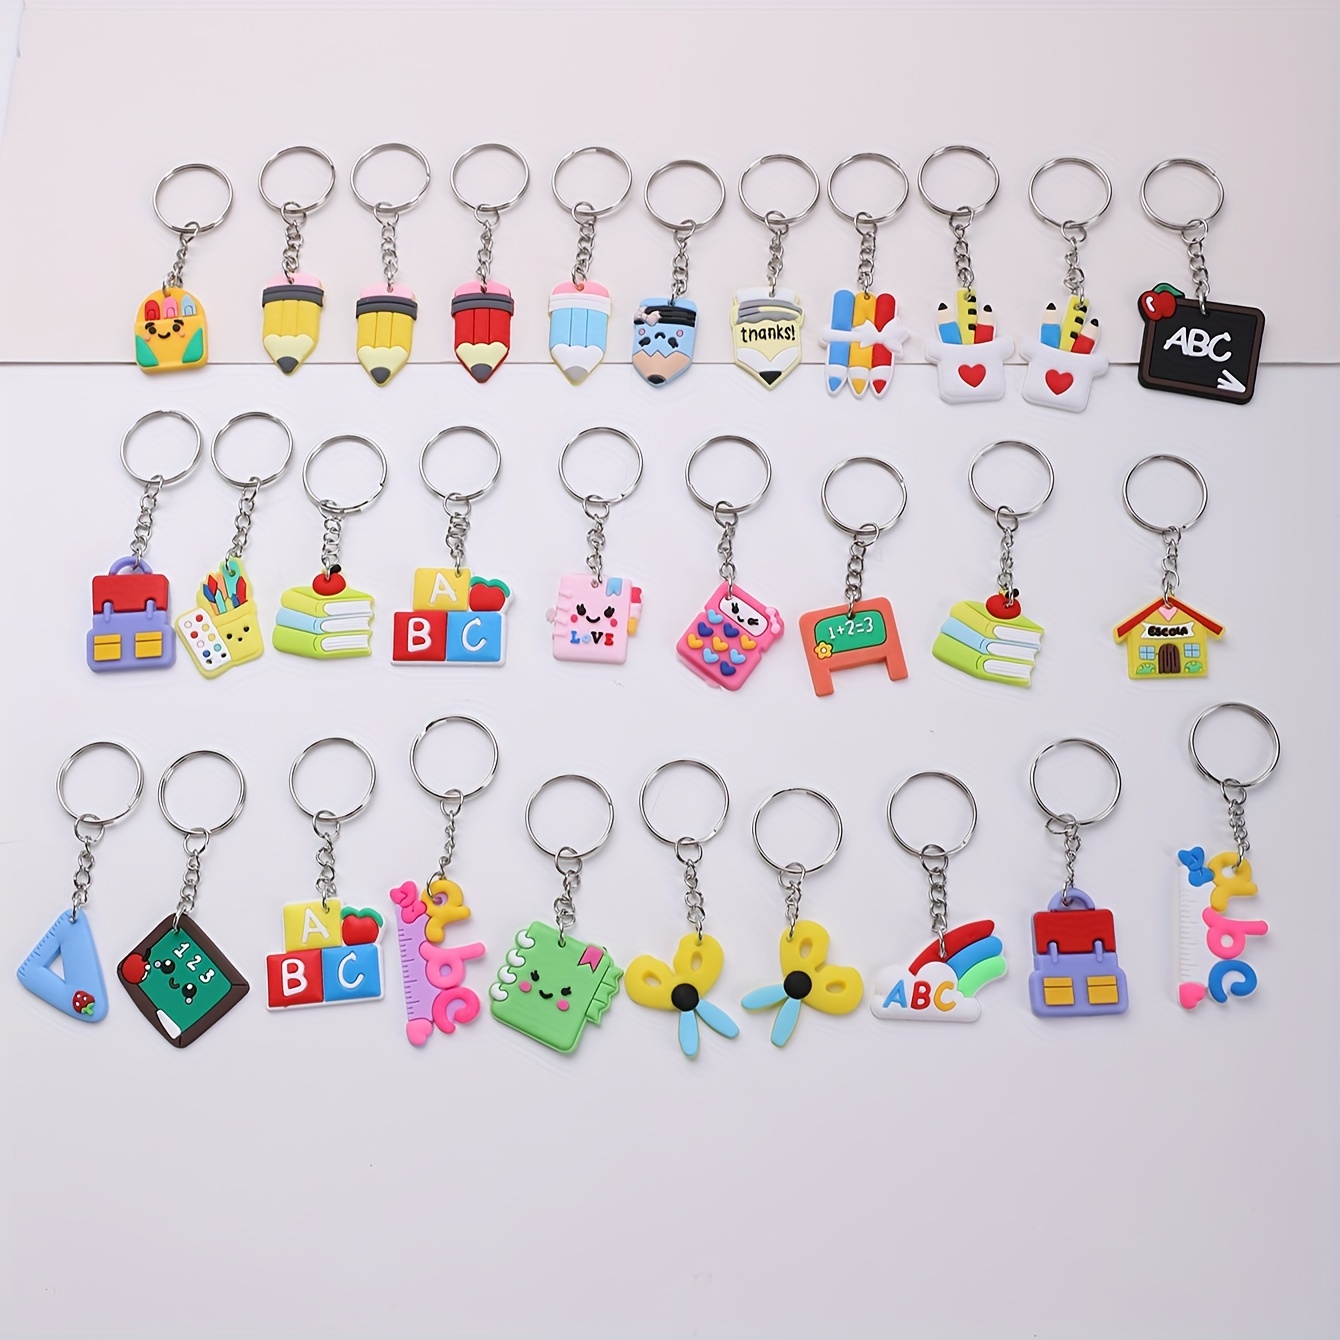 

30 Pcs Creative Cartoon Pvc Stationery Keychains, Cute Accessories For Women's Purses, Backpacks, Luggage, Holiday Party Favors